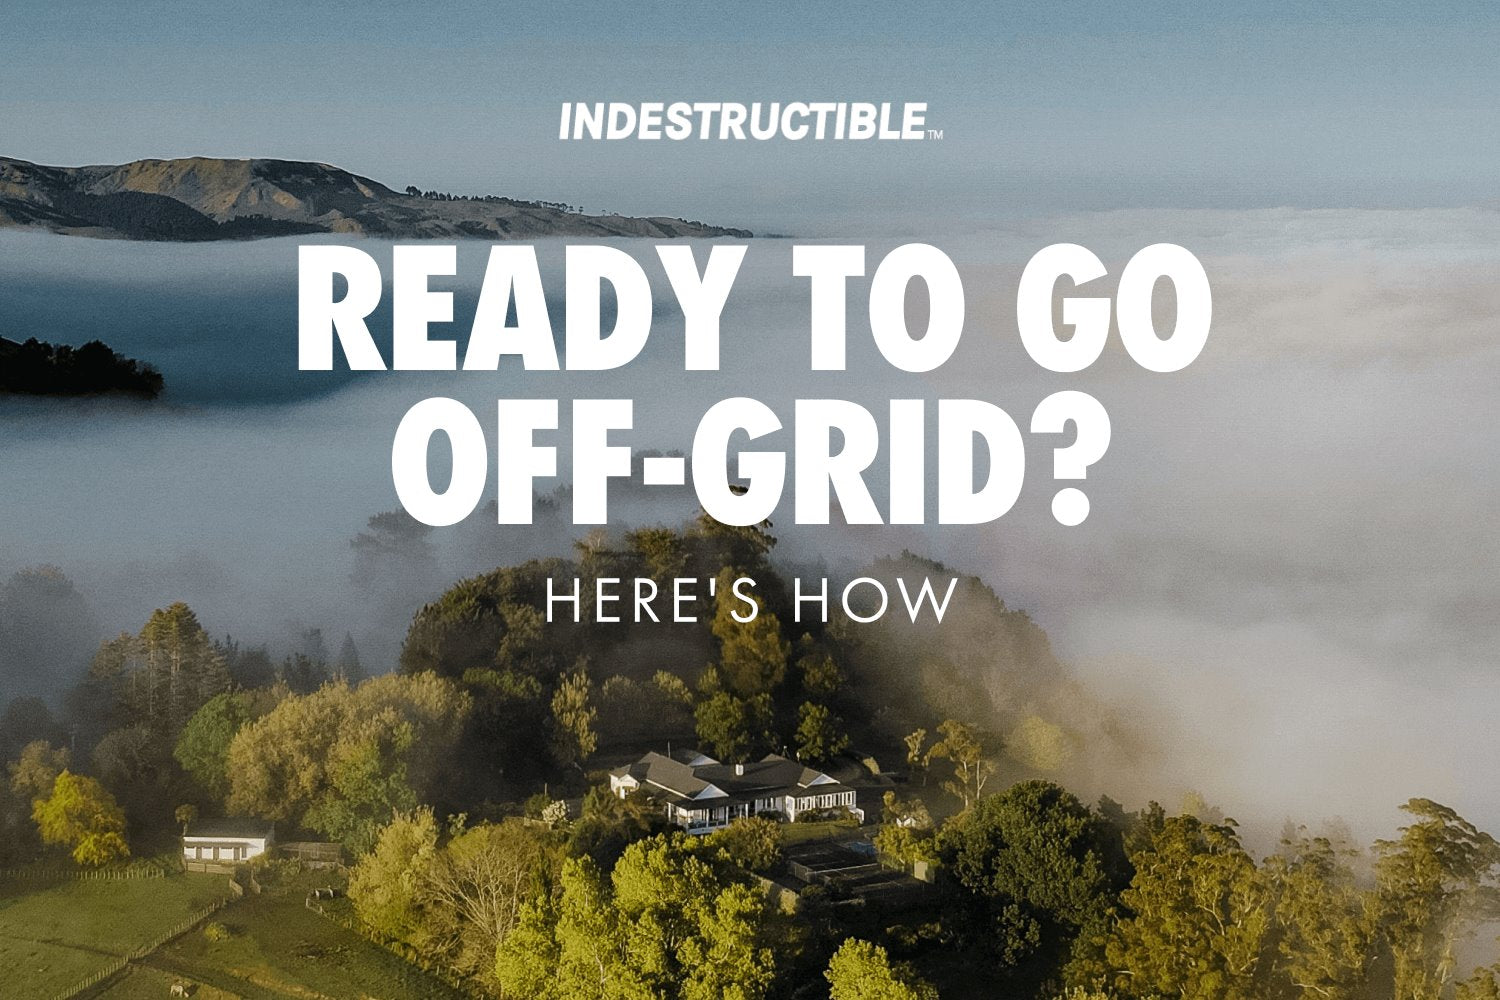 How to Live Off the Grid: The Basics of Sustainable Single-Living